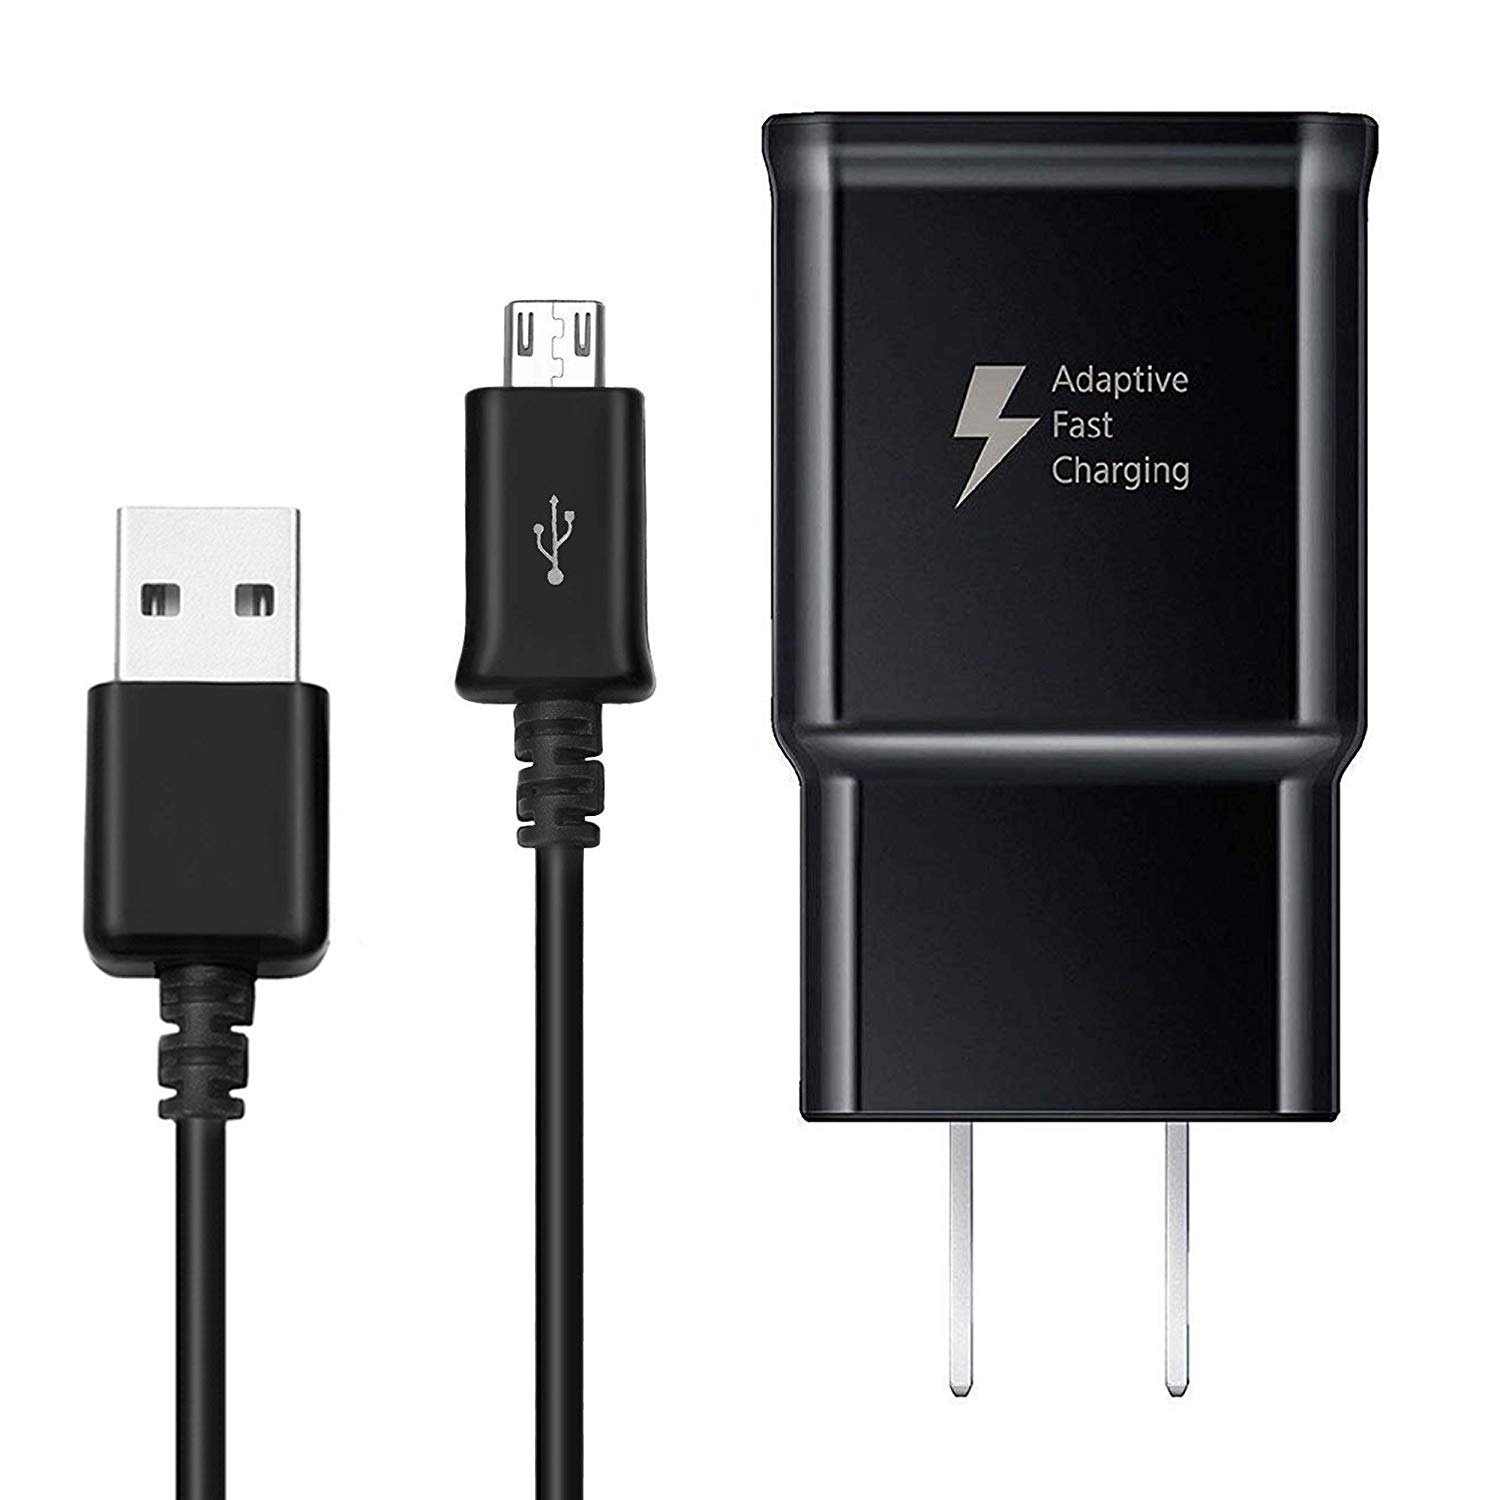 Fast Adaptive Charging Wall Charger Adapter + 1m Micro USB Cable for Samsung Galaxy S4 S6 S7 Edge Plus Note 2 4 Alpha, Black